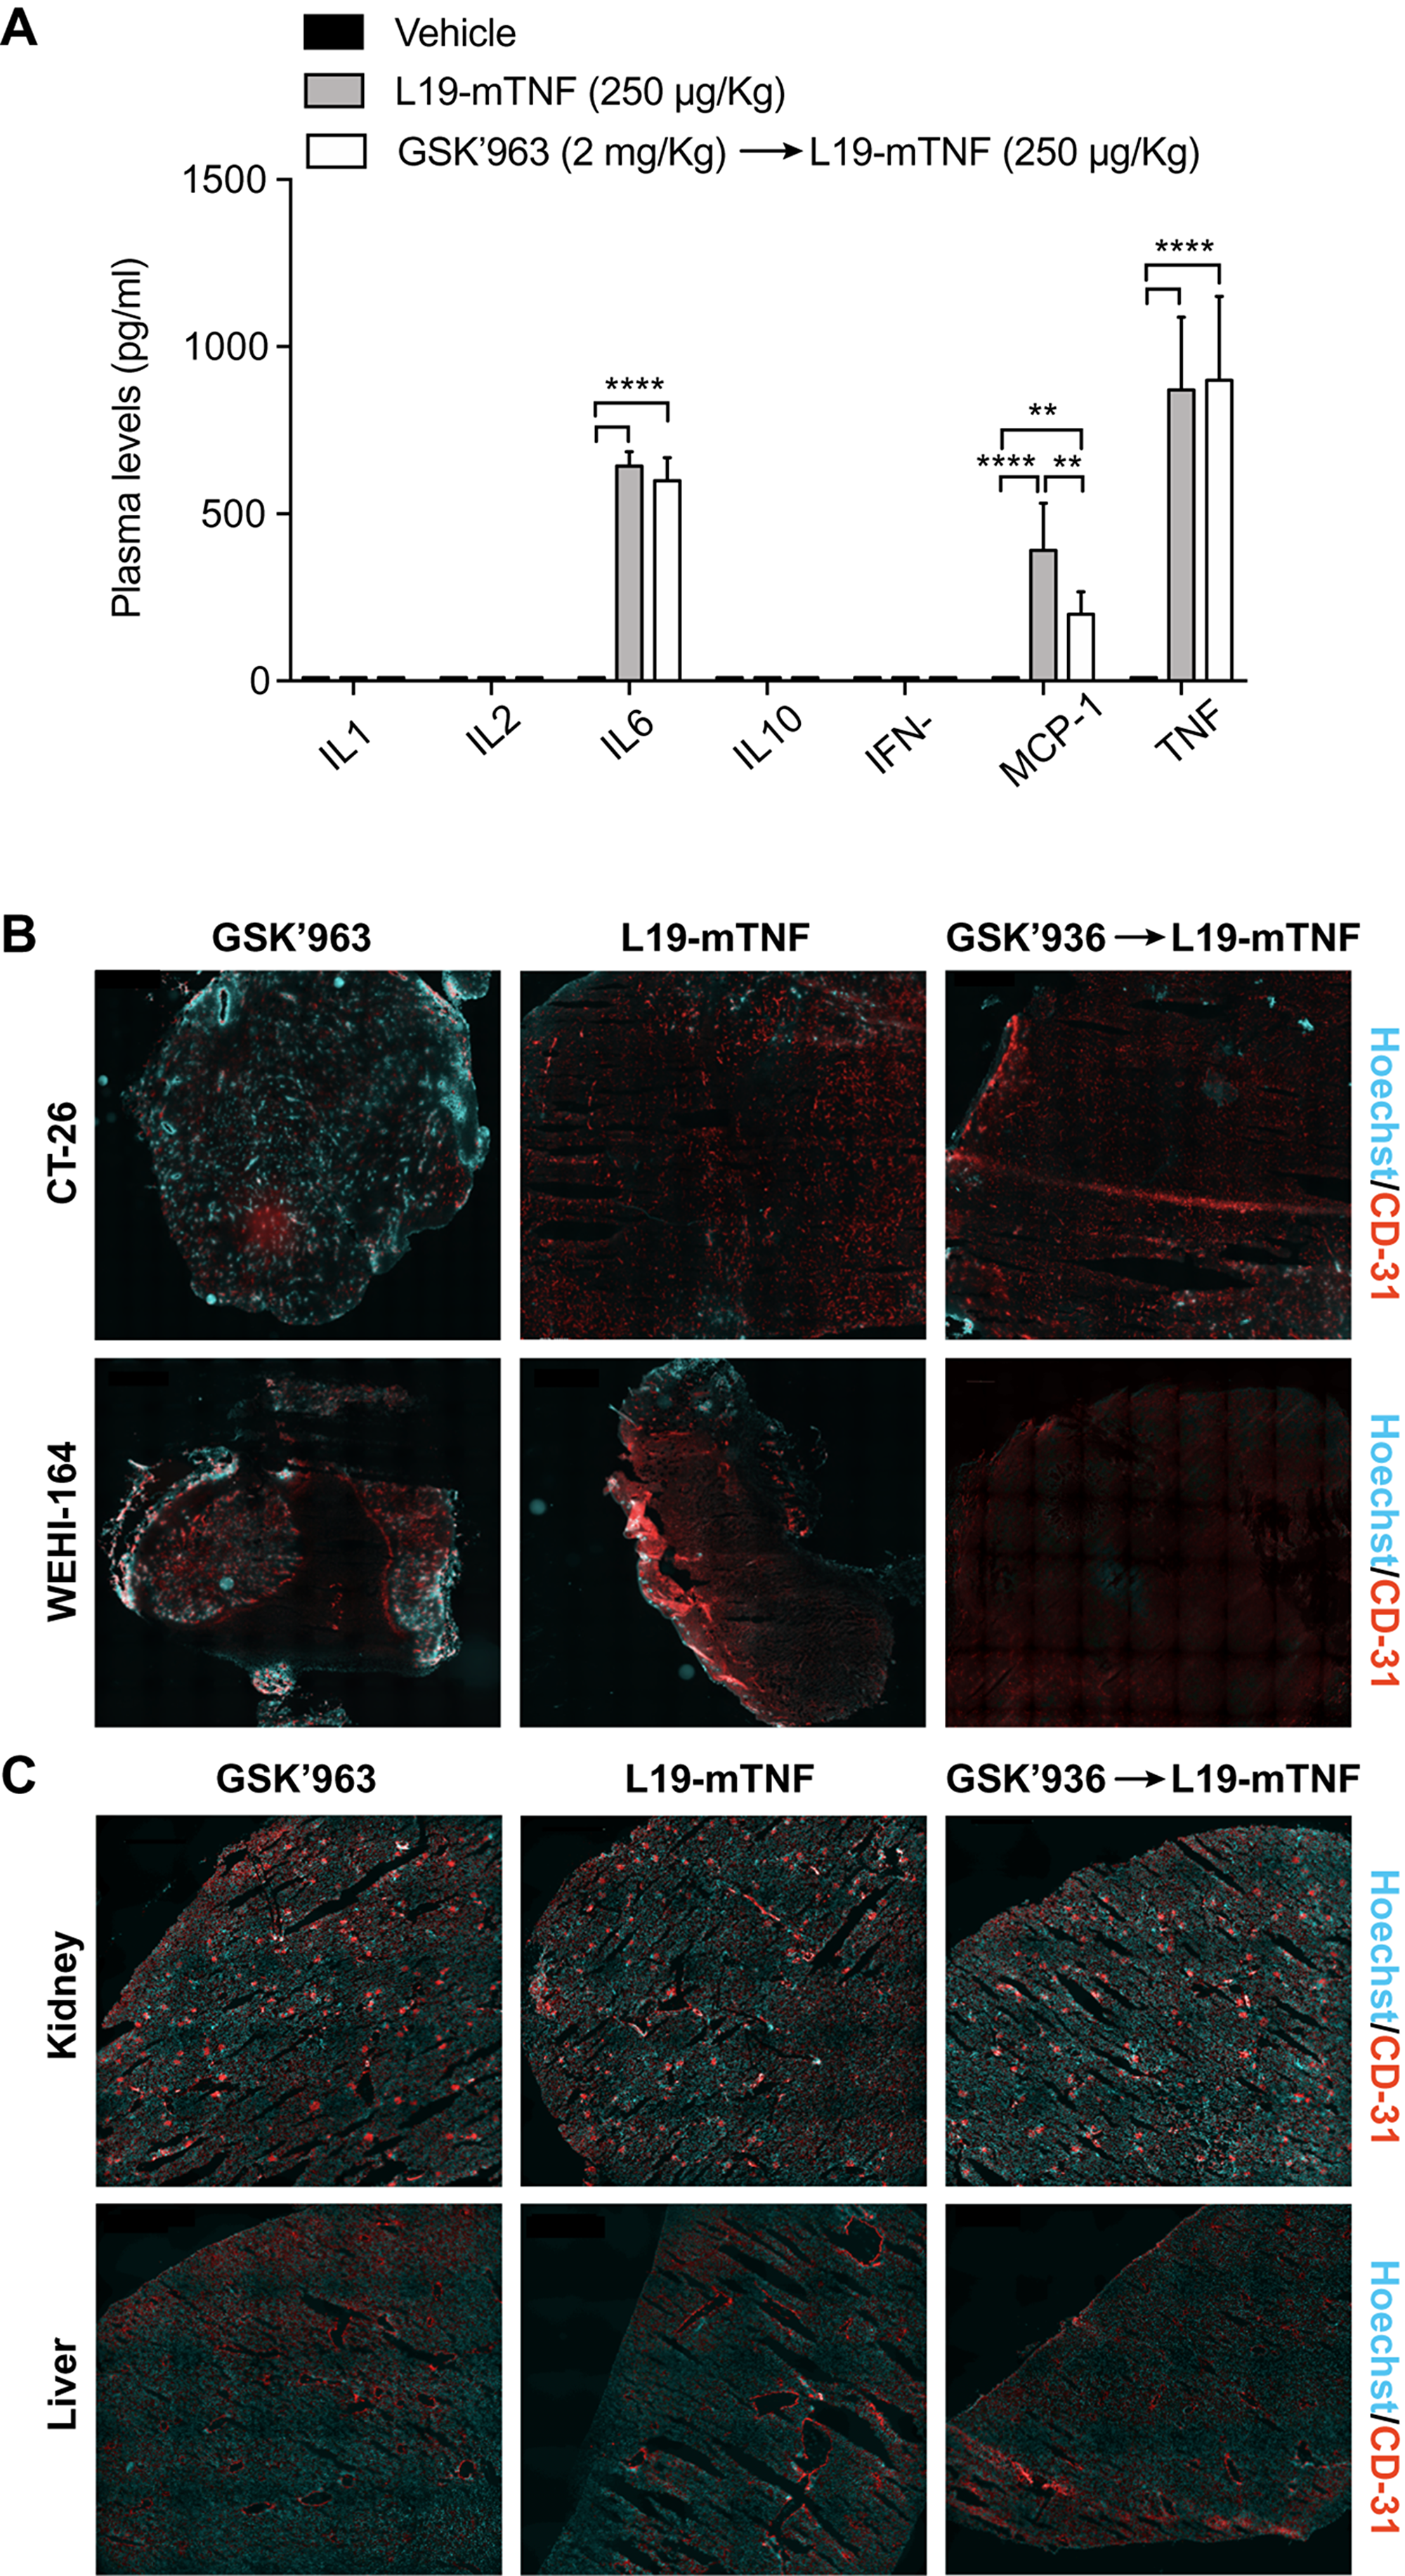 Determination of L19-mTNF effects on cytokine levels and vasculature in mice.